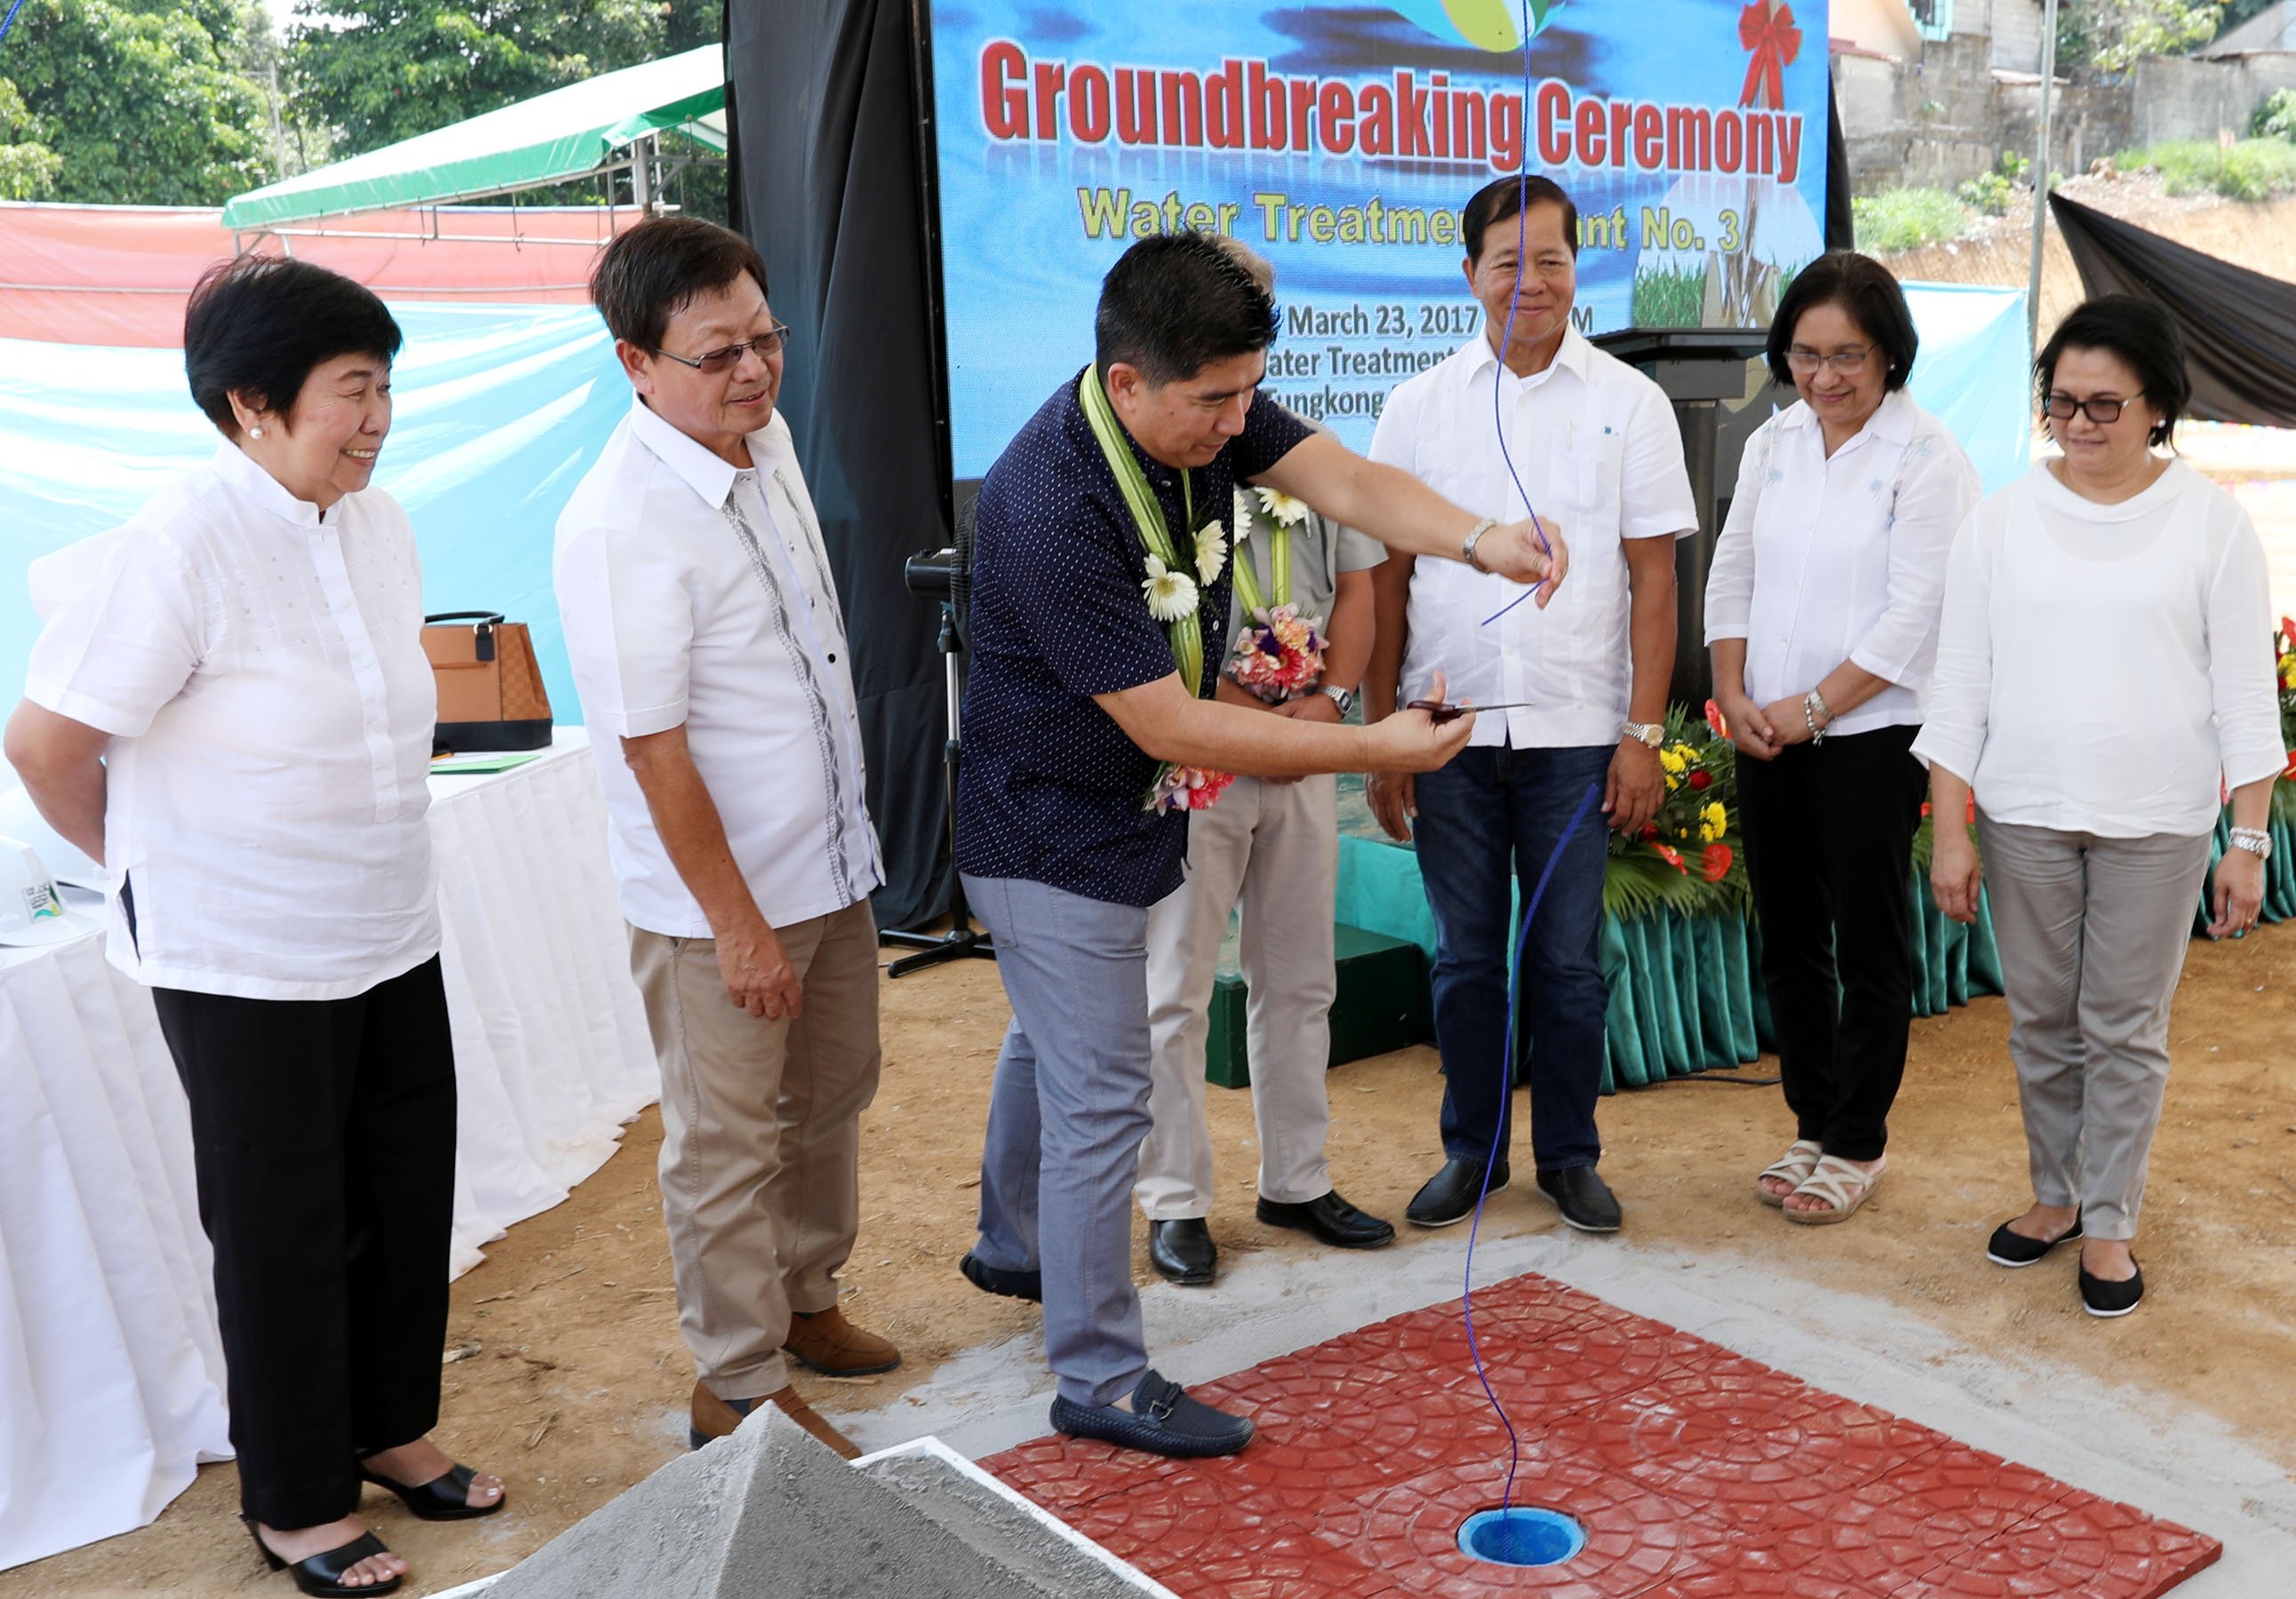 San Jose Del Monte City Mayor Arthur B. Robes cuts the ropes after lowering of the time capsule for WTP-3